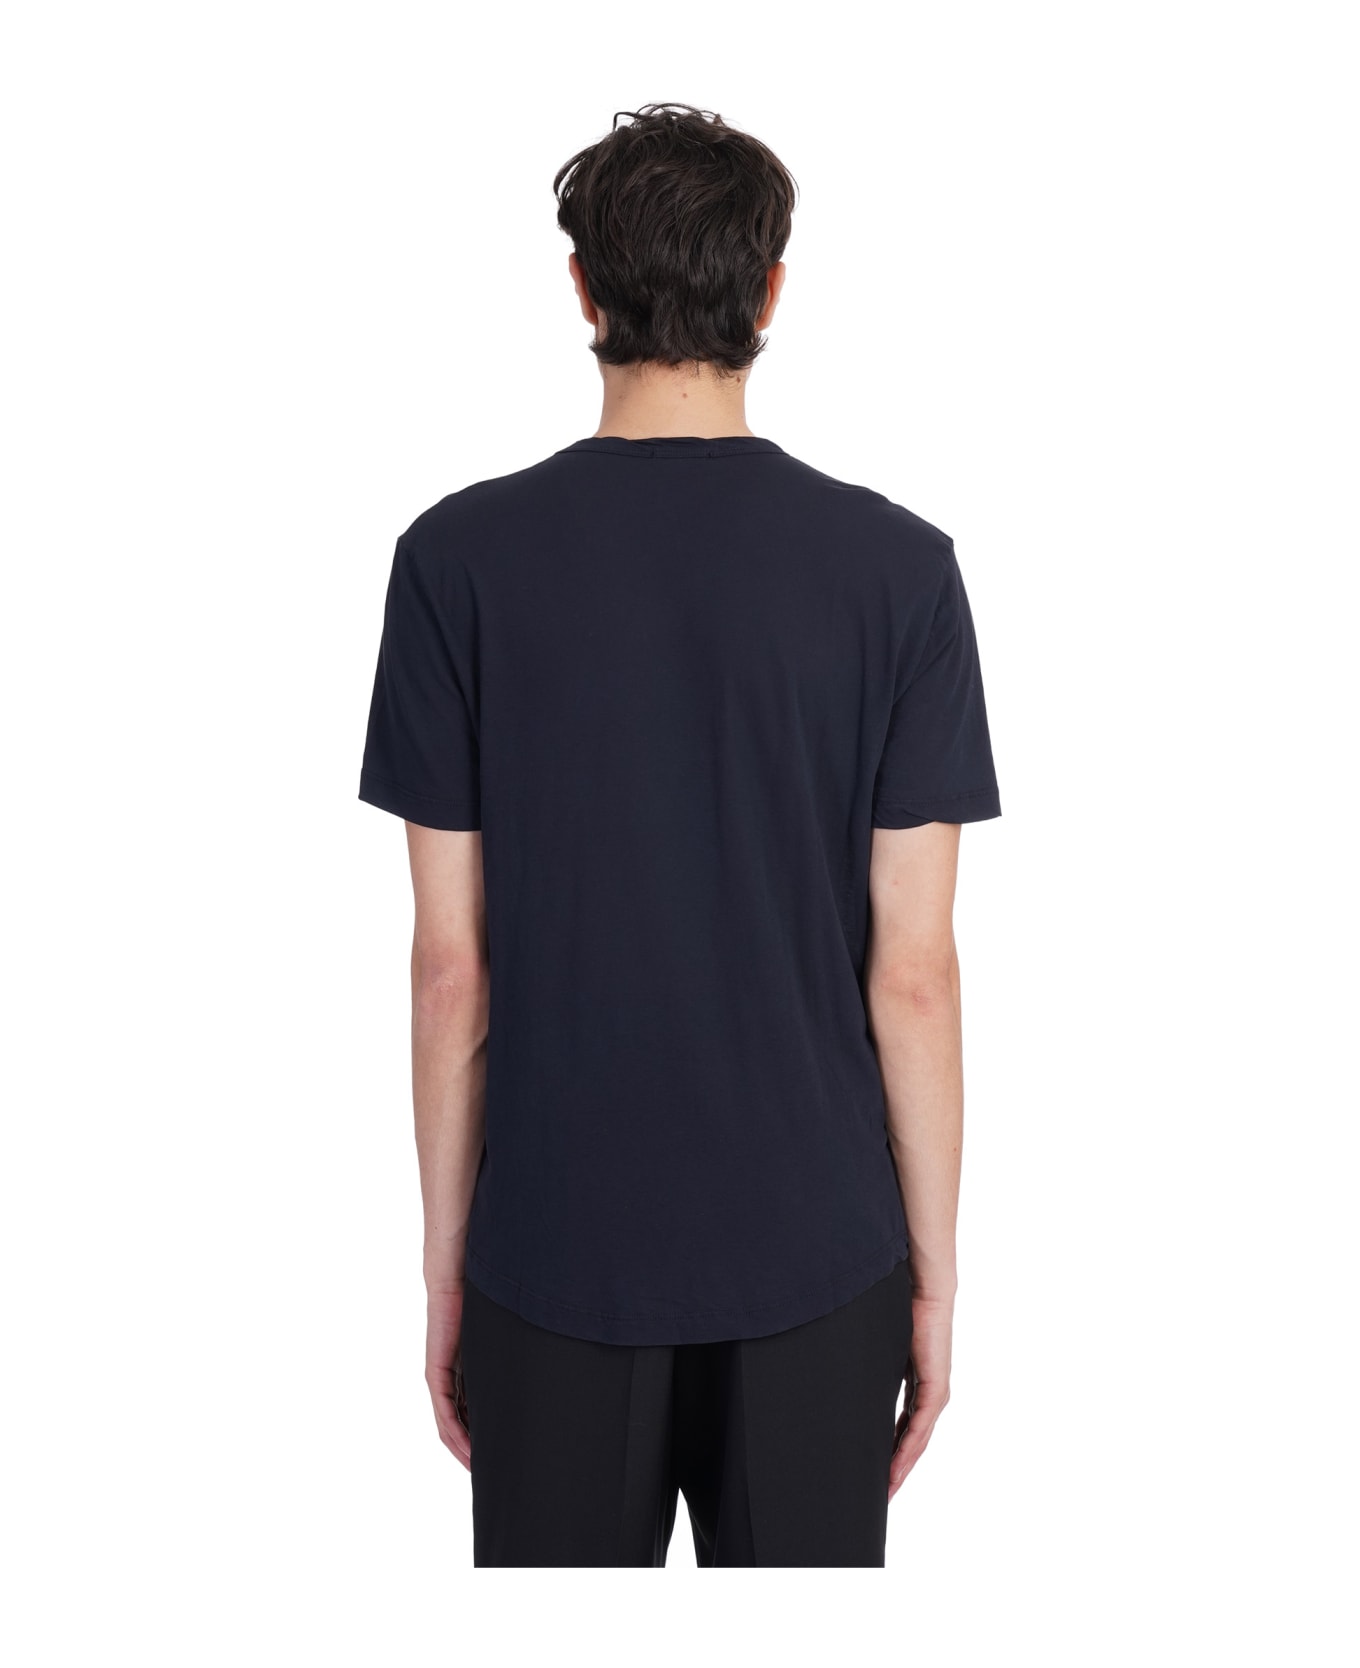 James Perse T-shirt In Blue Cotton - blue